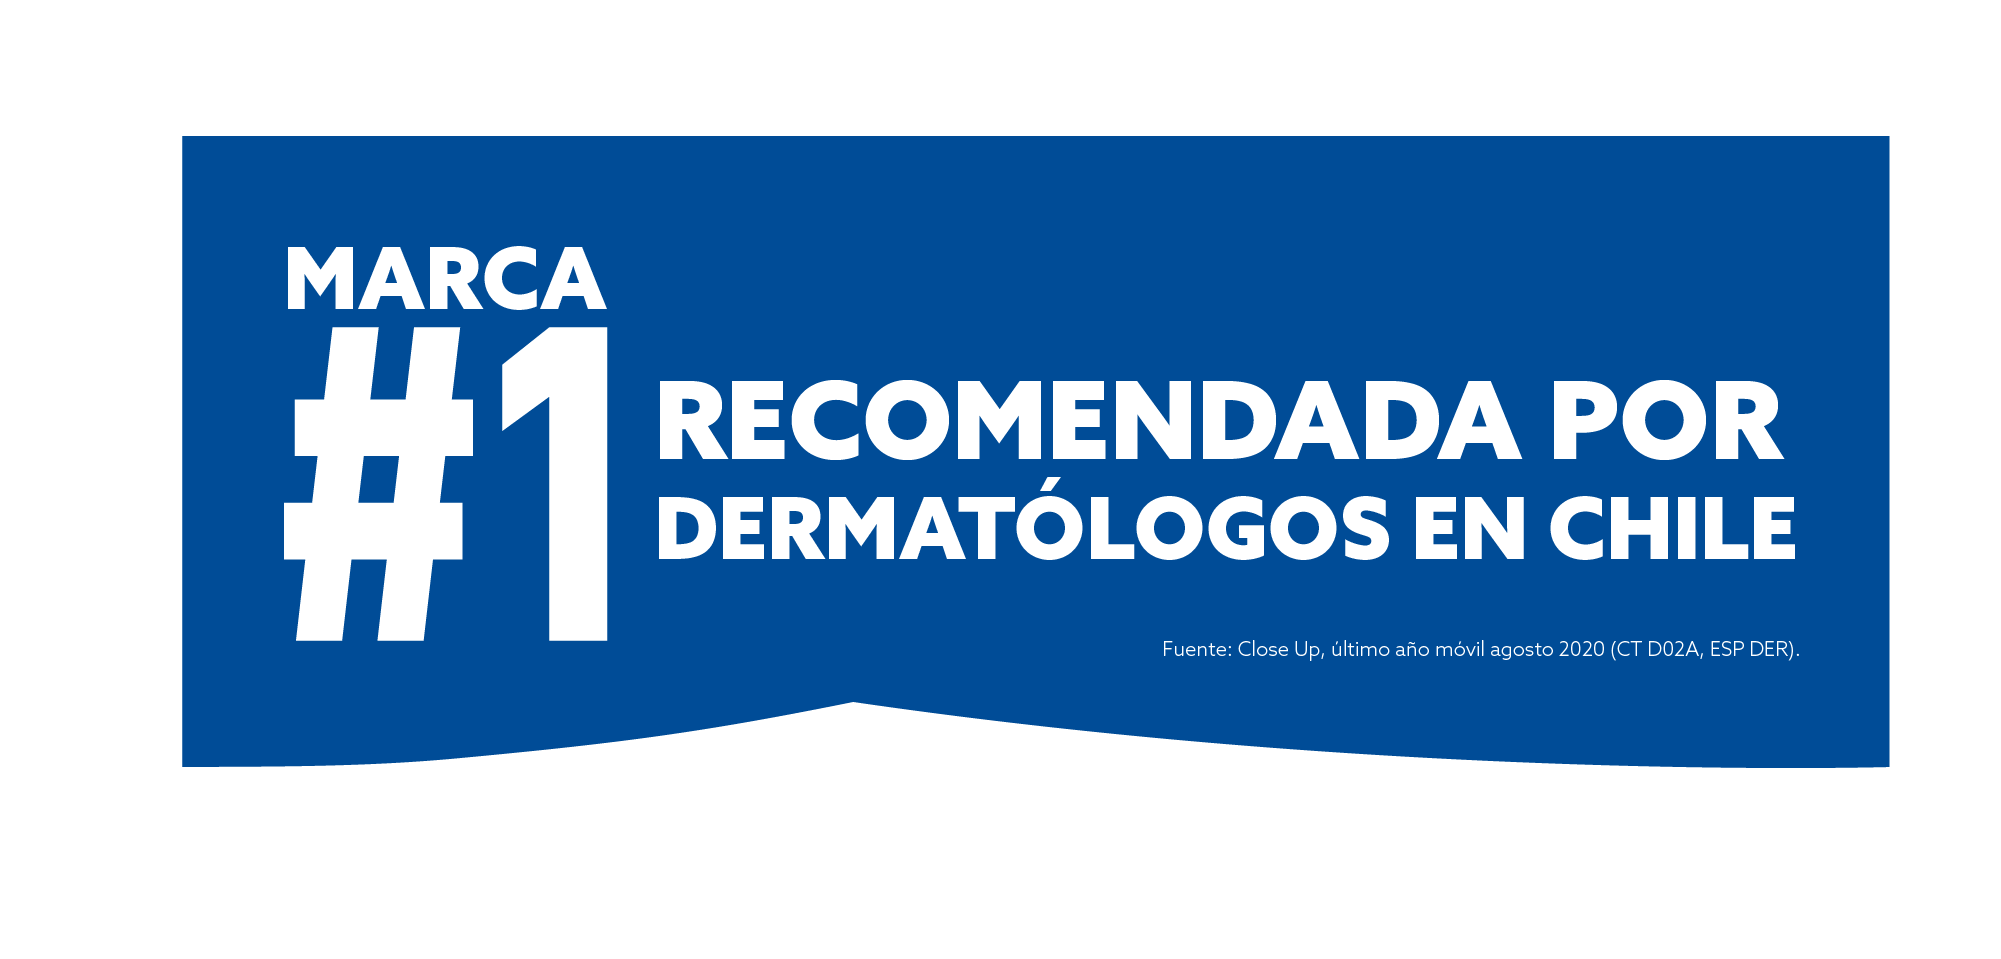 #1 dermatologist recommended